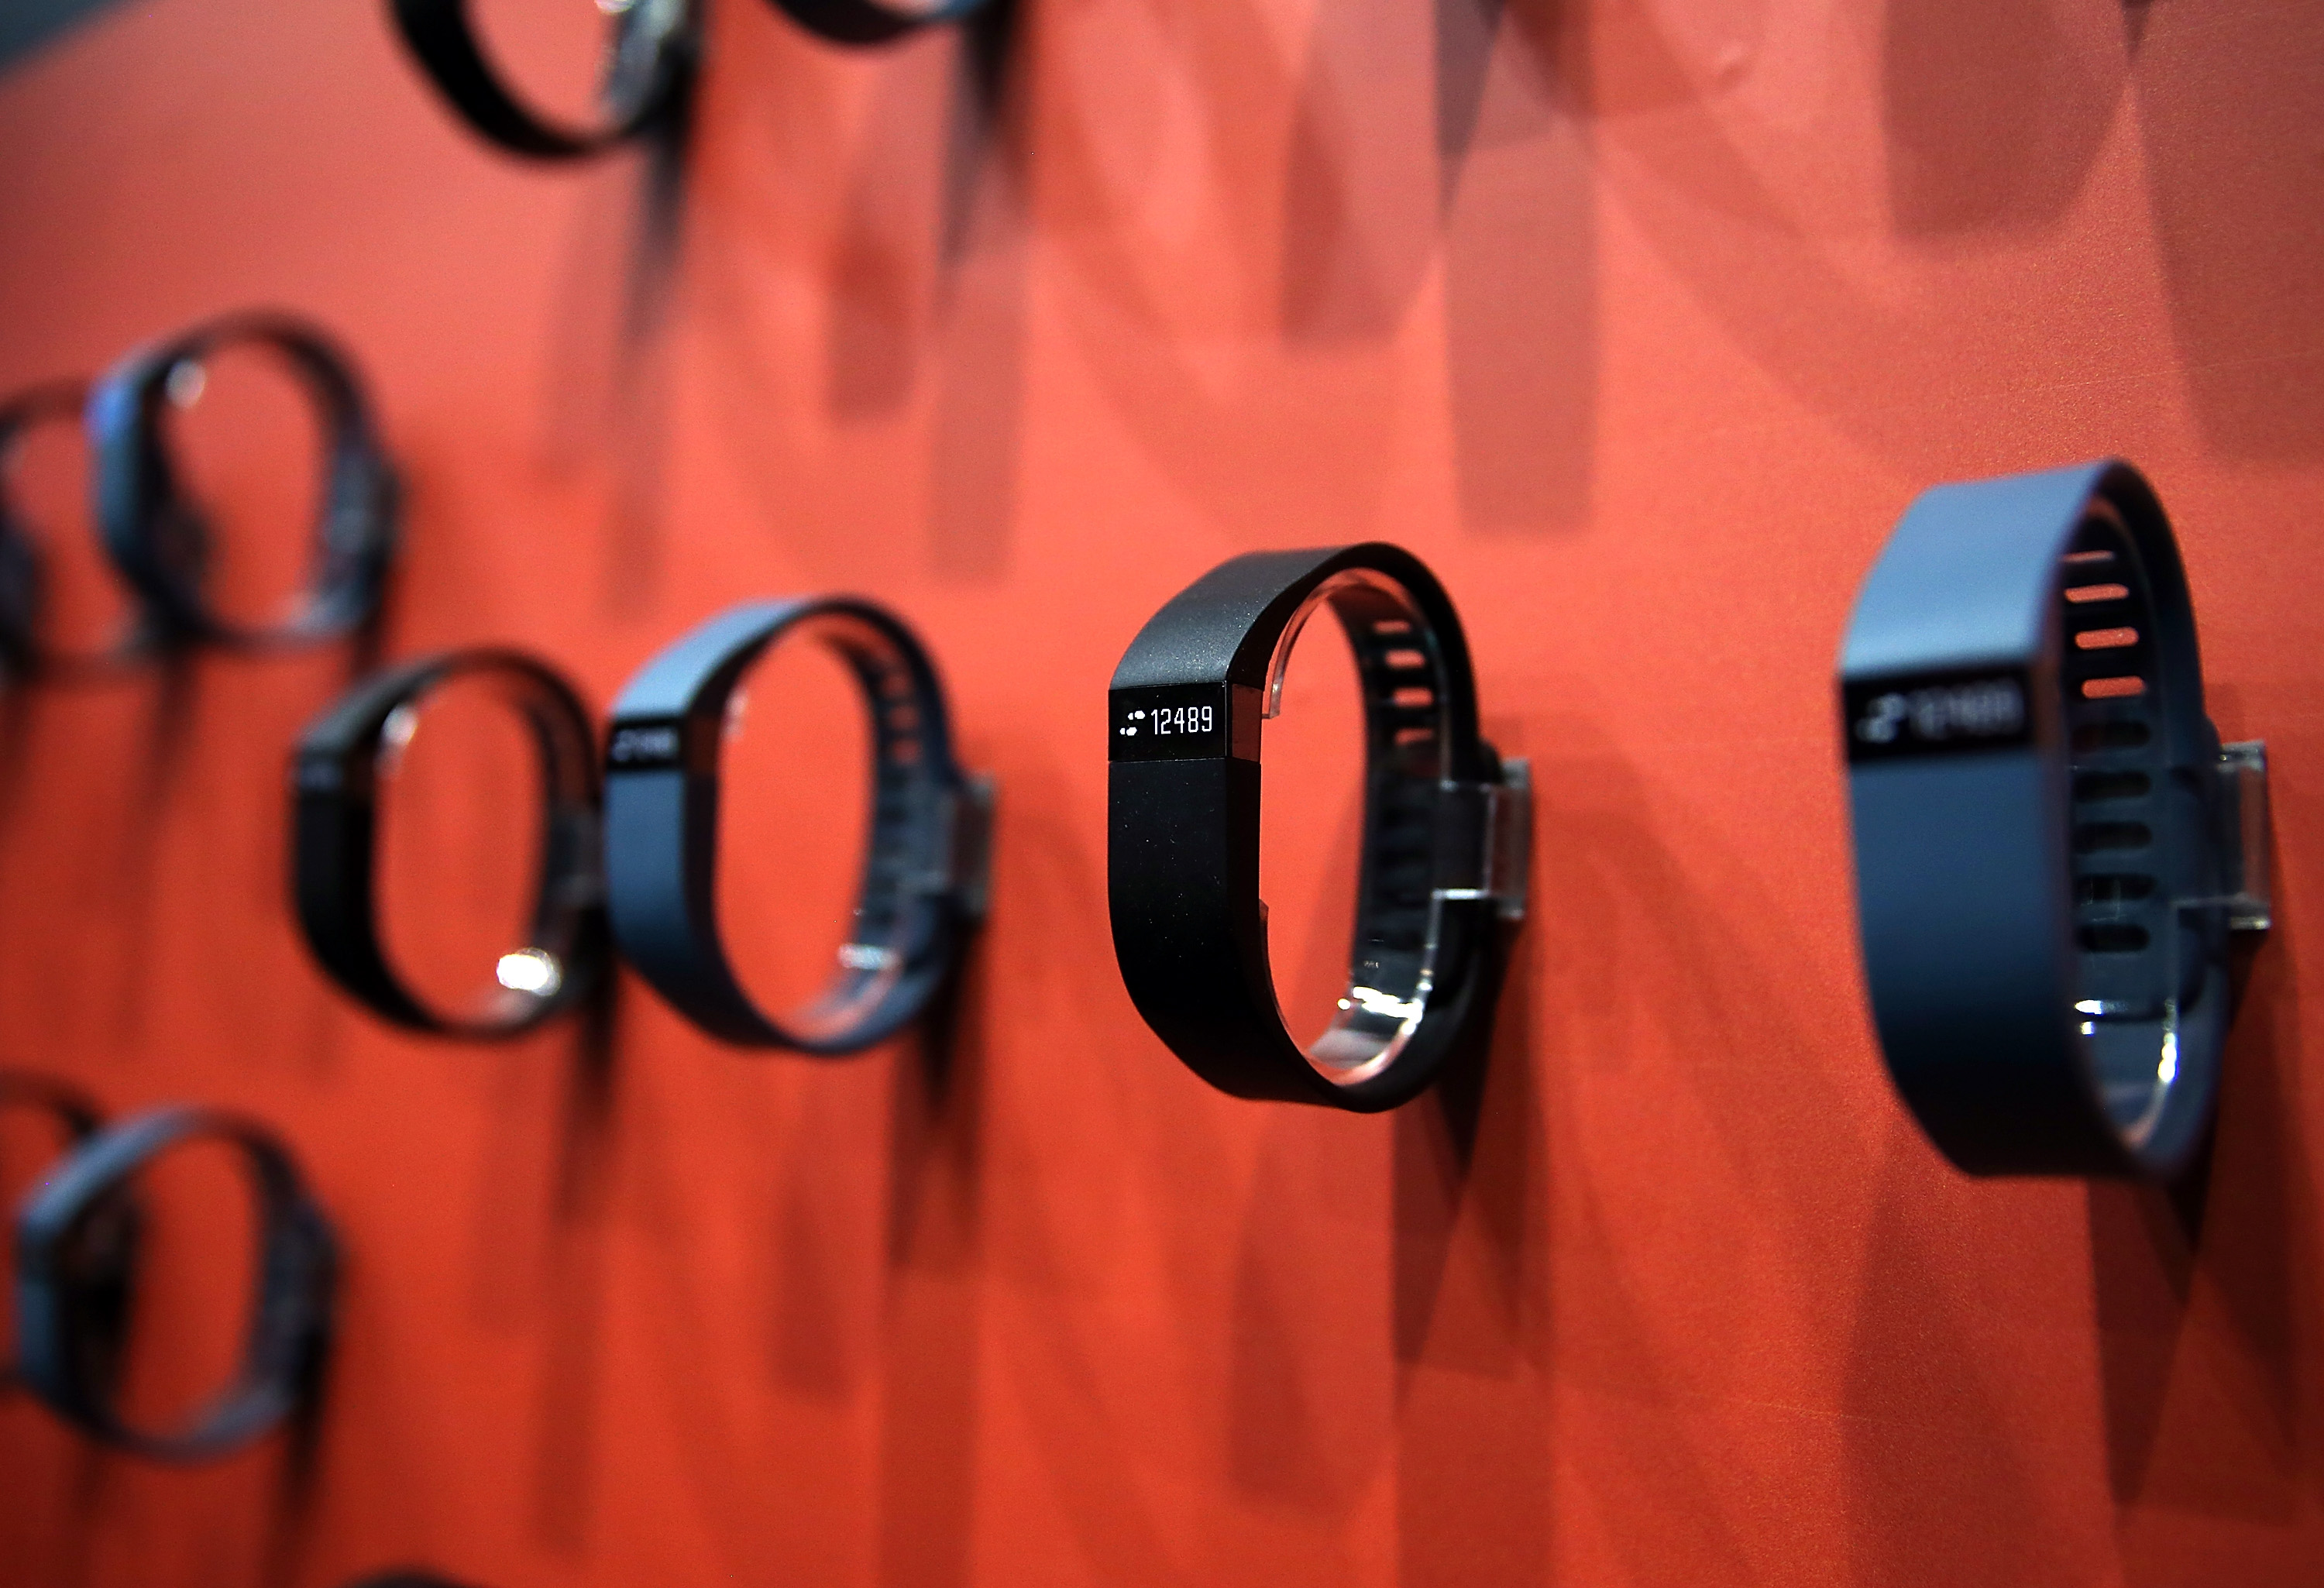 Fitbit's Digifit already takes users' heart rate and monitors distance and calories, which makes Apple fans wonder what the newest Healthbook will do different. (Getty)